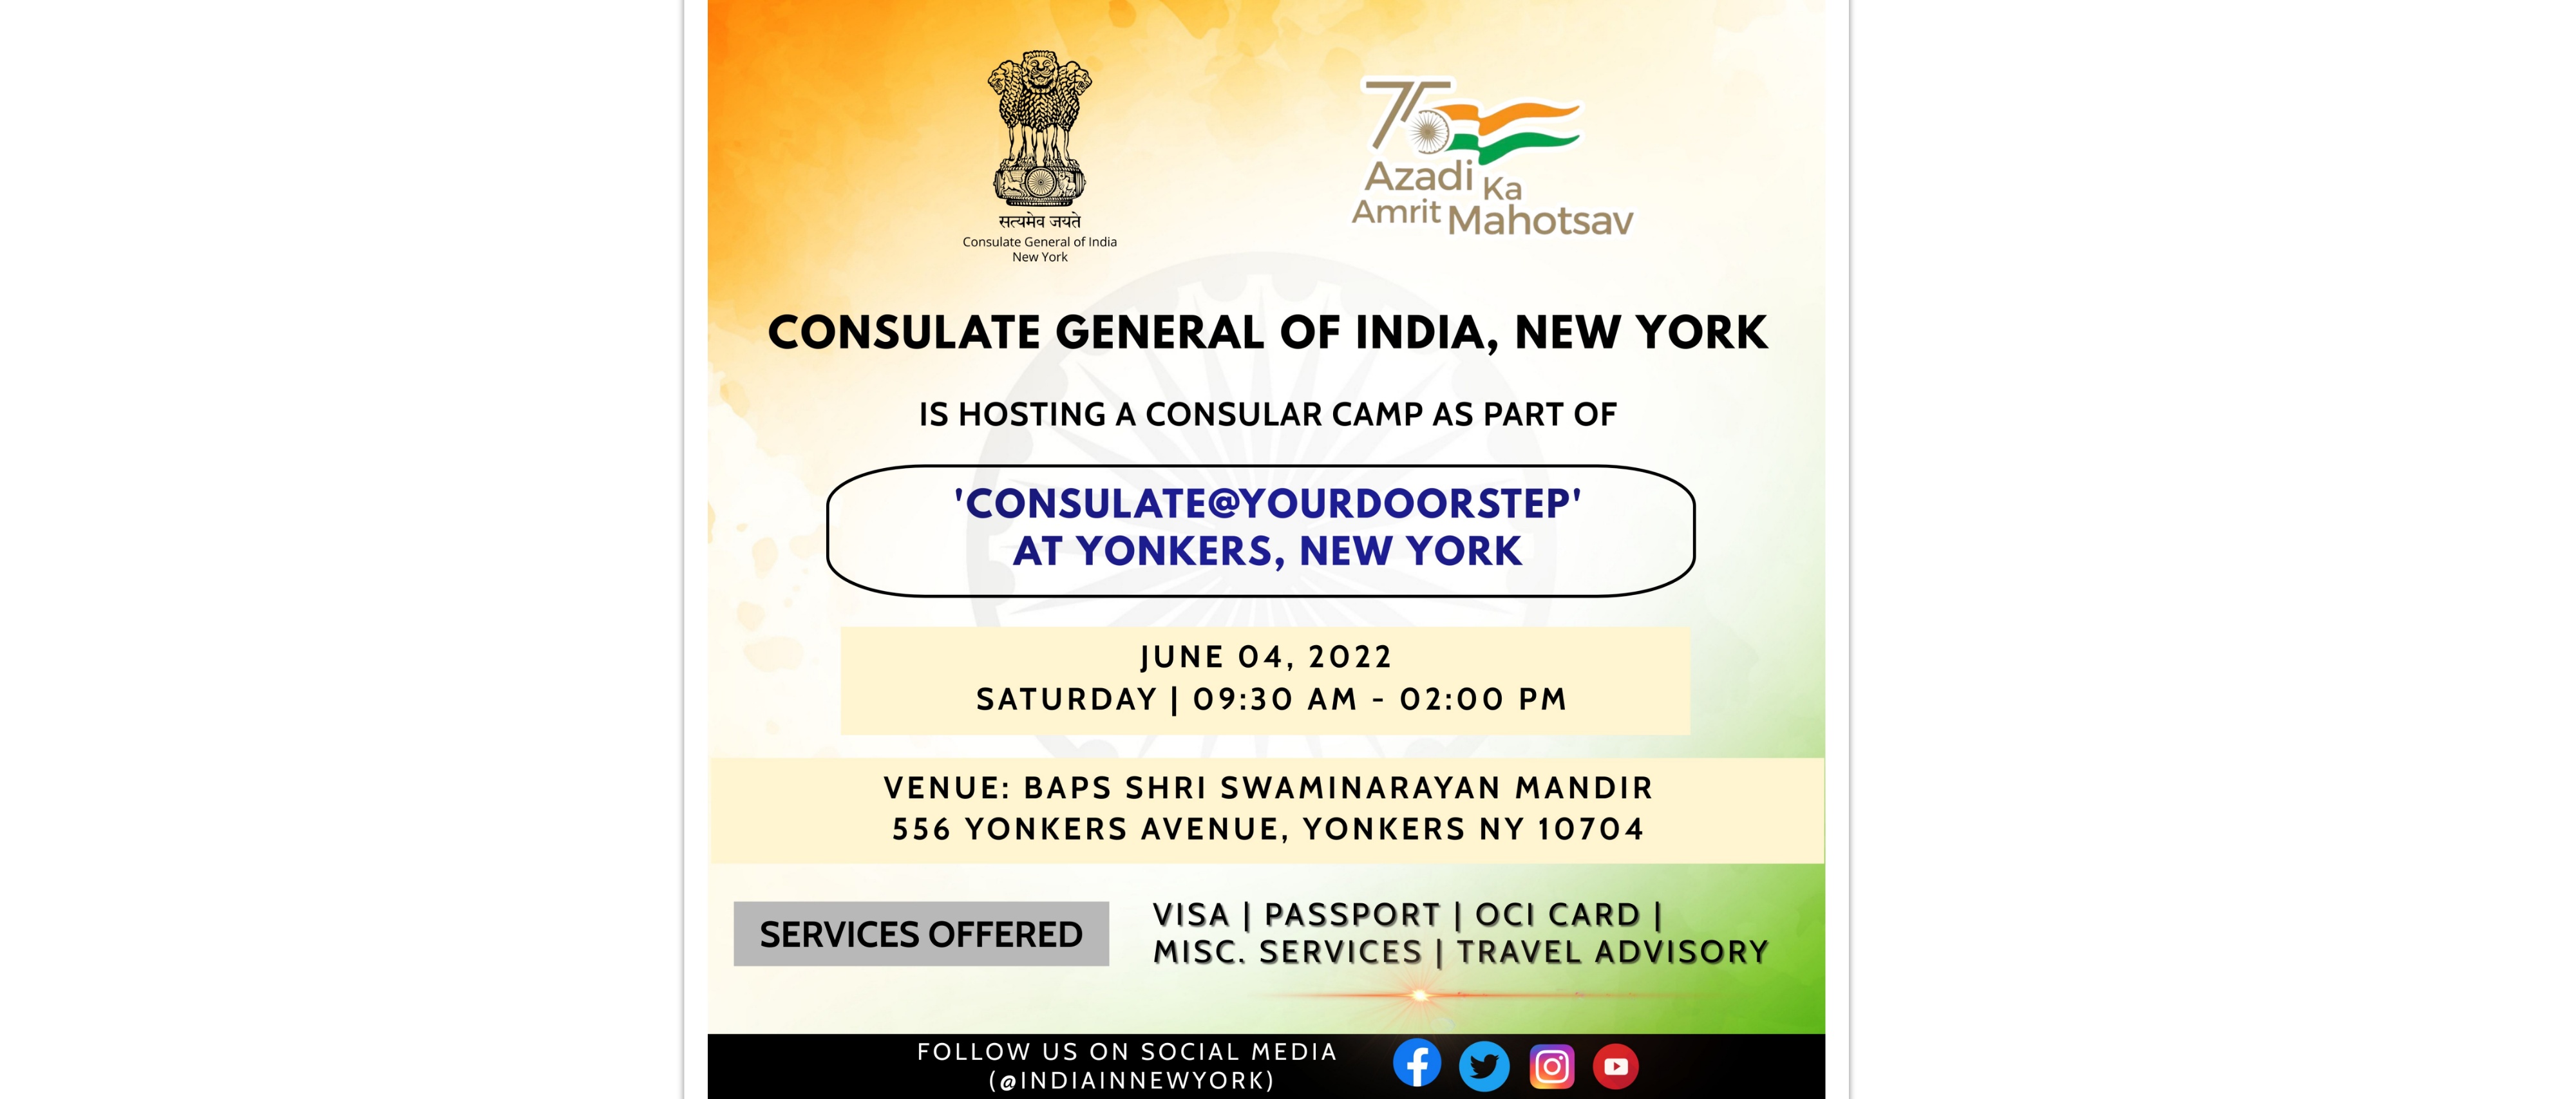  Consulate@YourDoorStep  on June 04  at Yonkers, New York